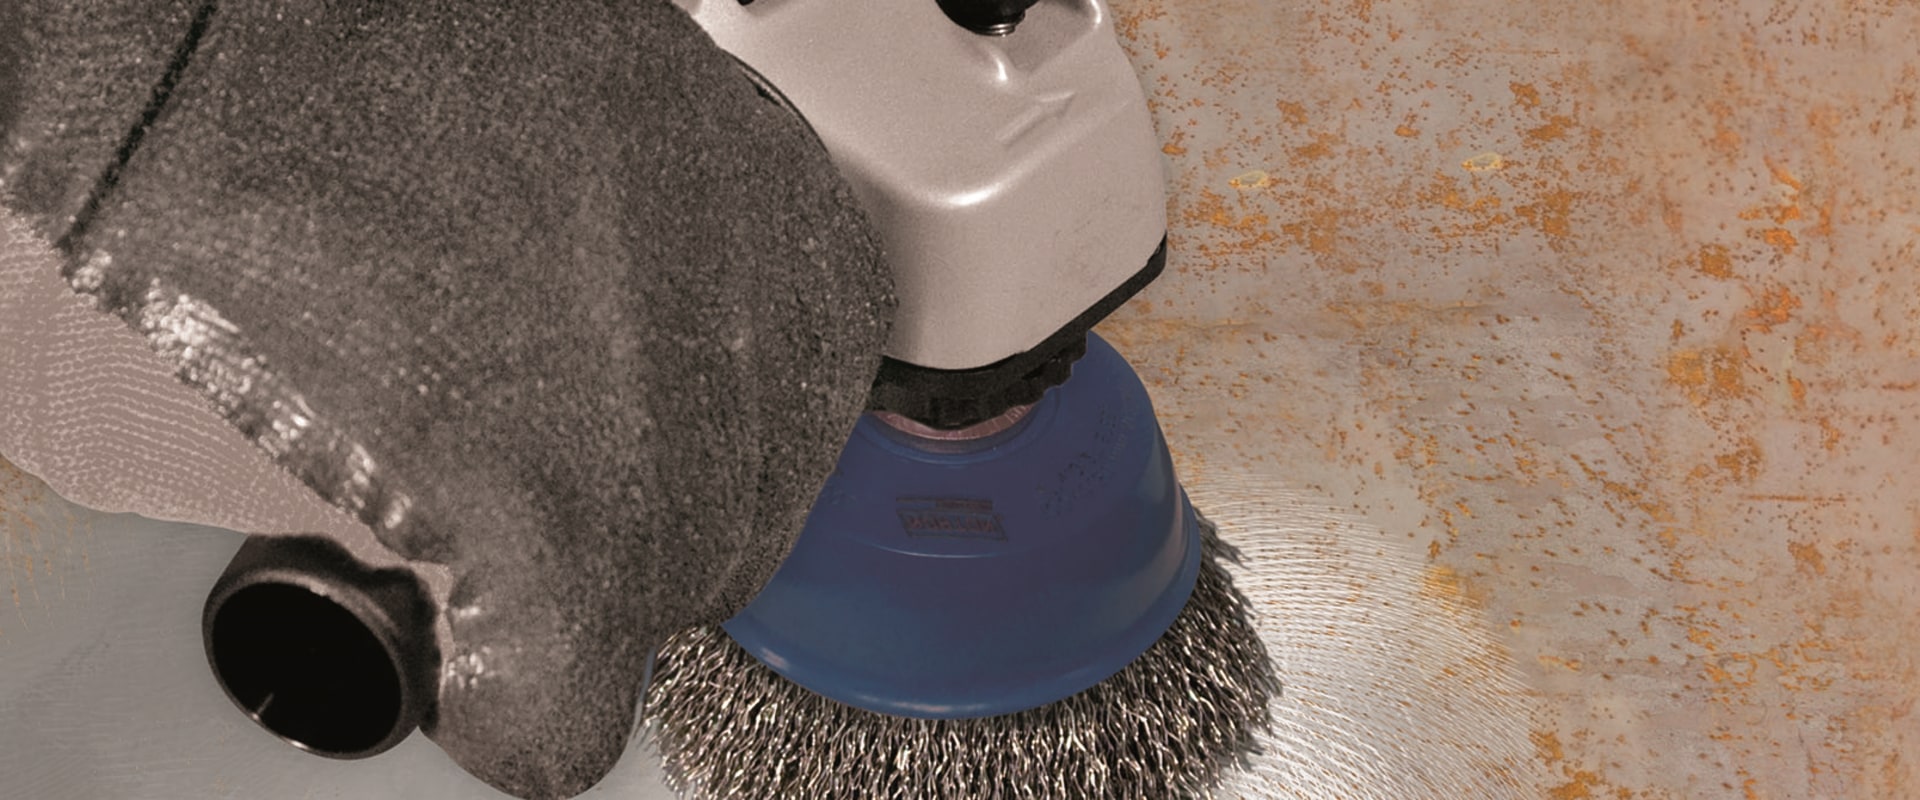 How to Choose the Right Wire Brush and Scrubbing Brush